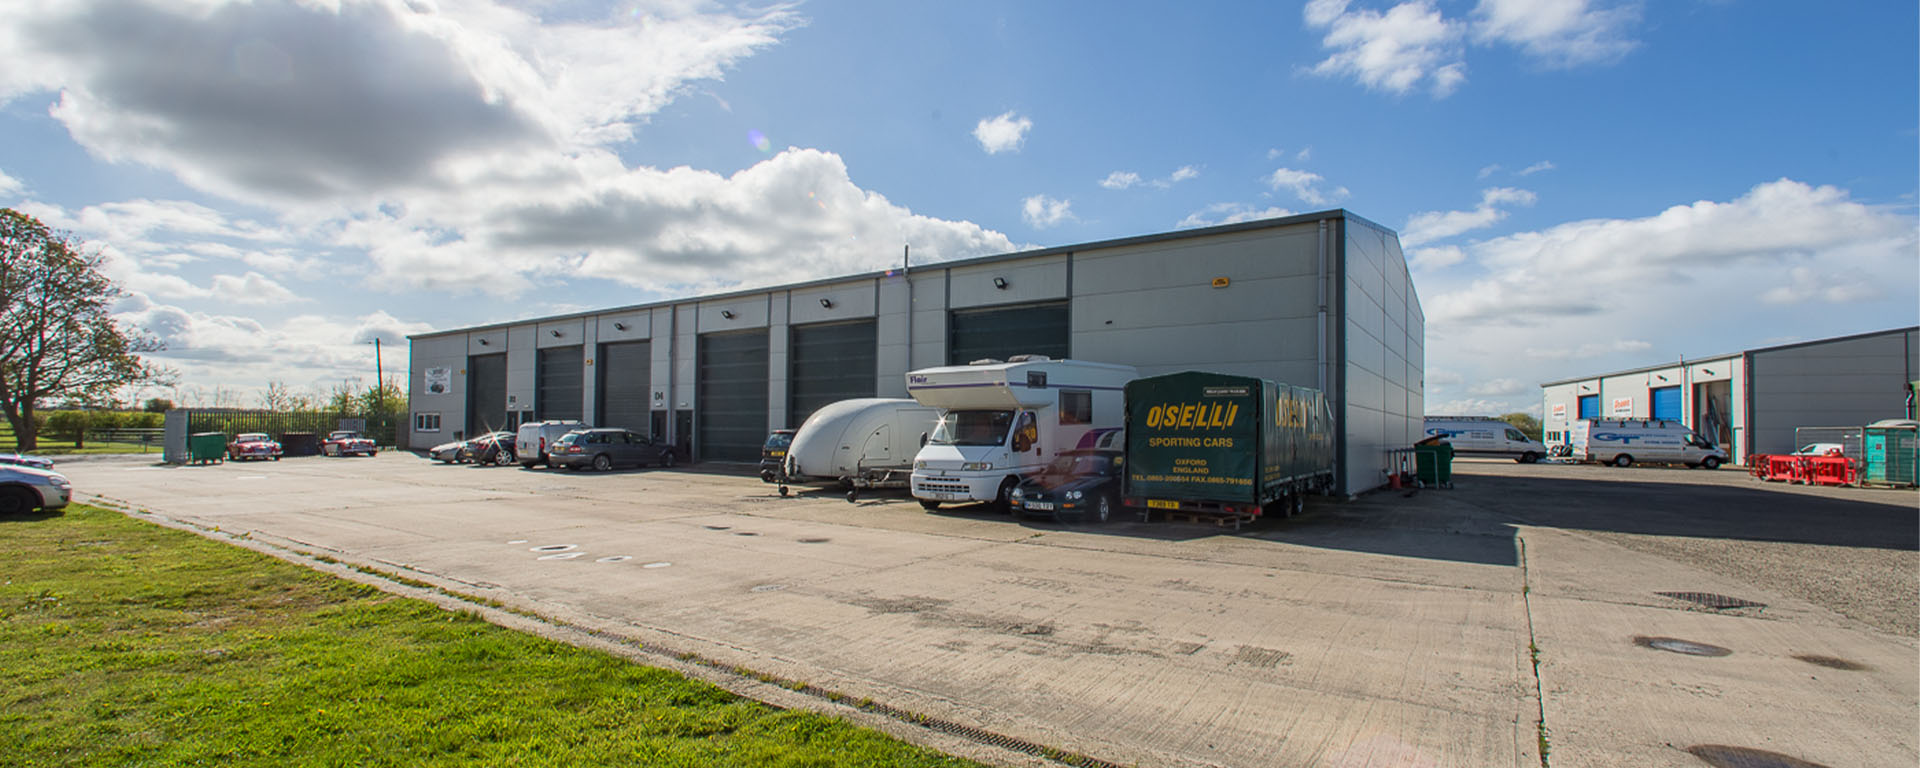 Small industrial unit row